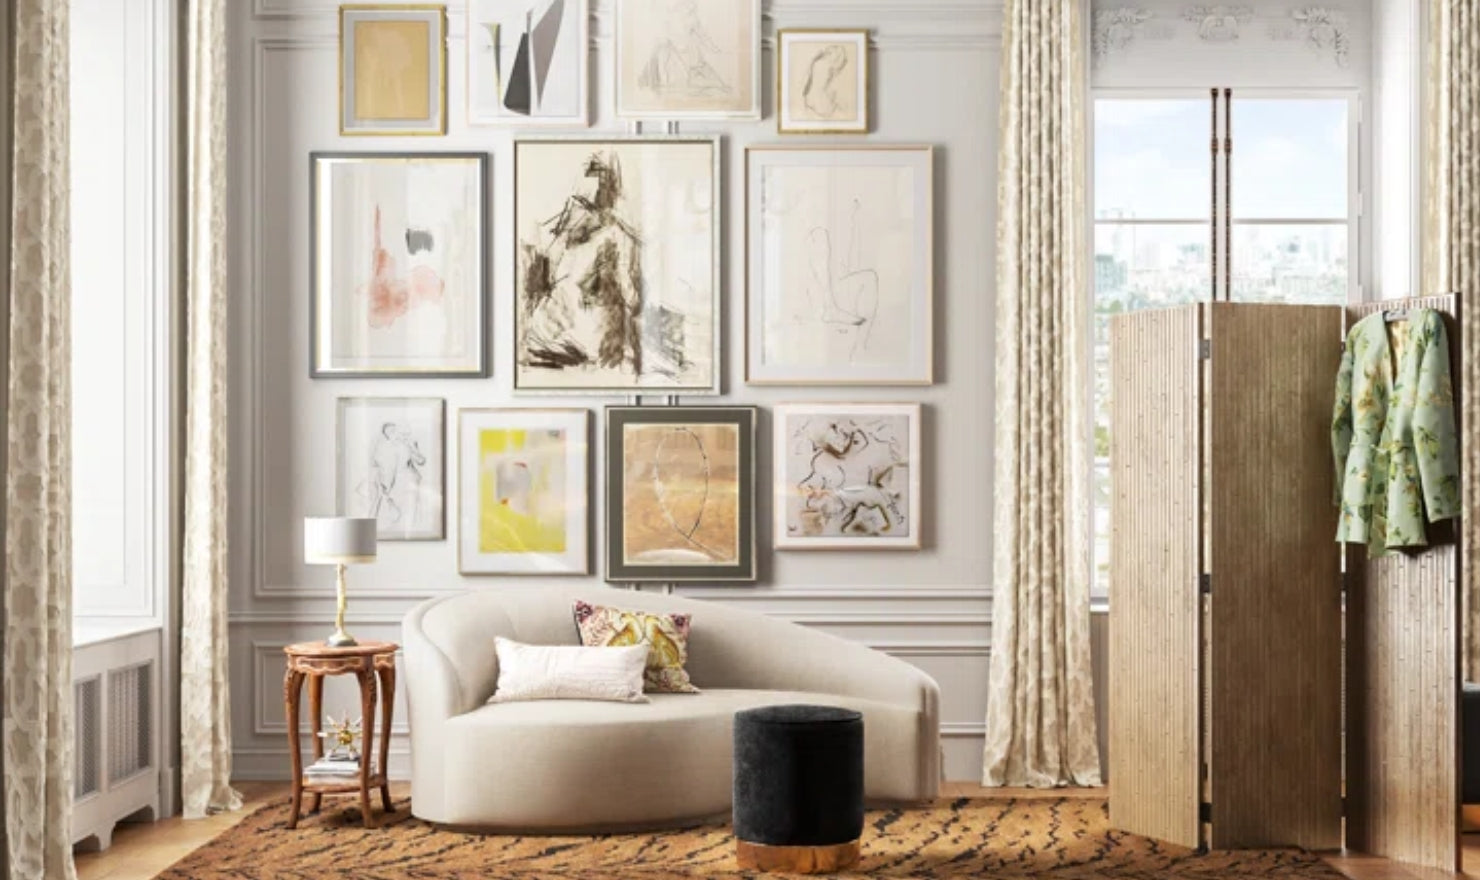 You won't regret hanging a gallery wall